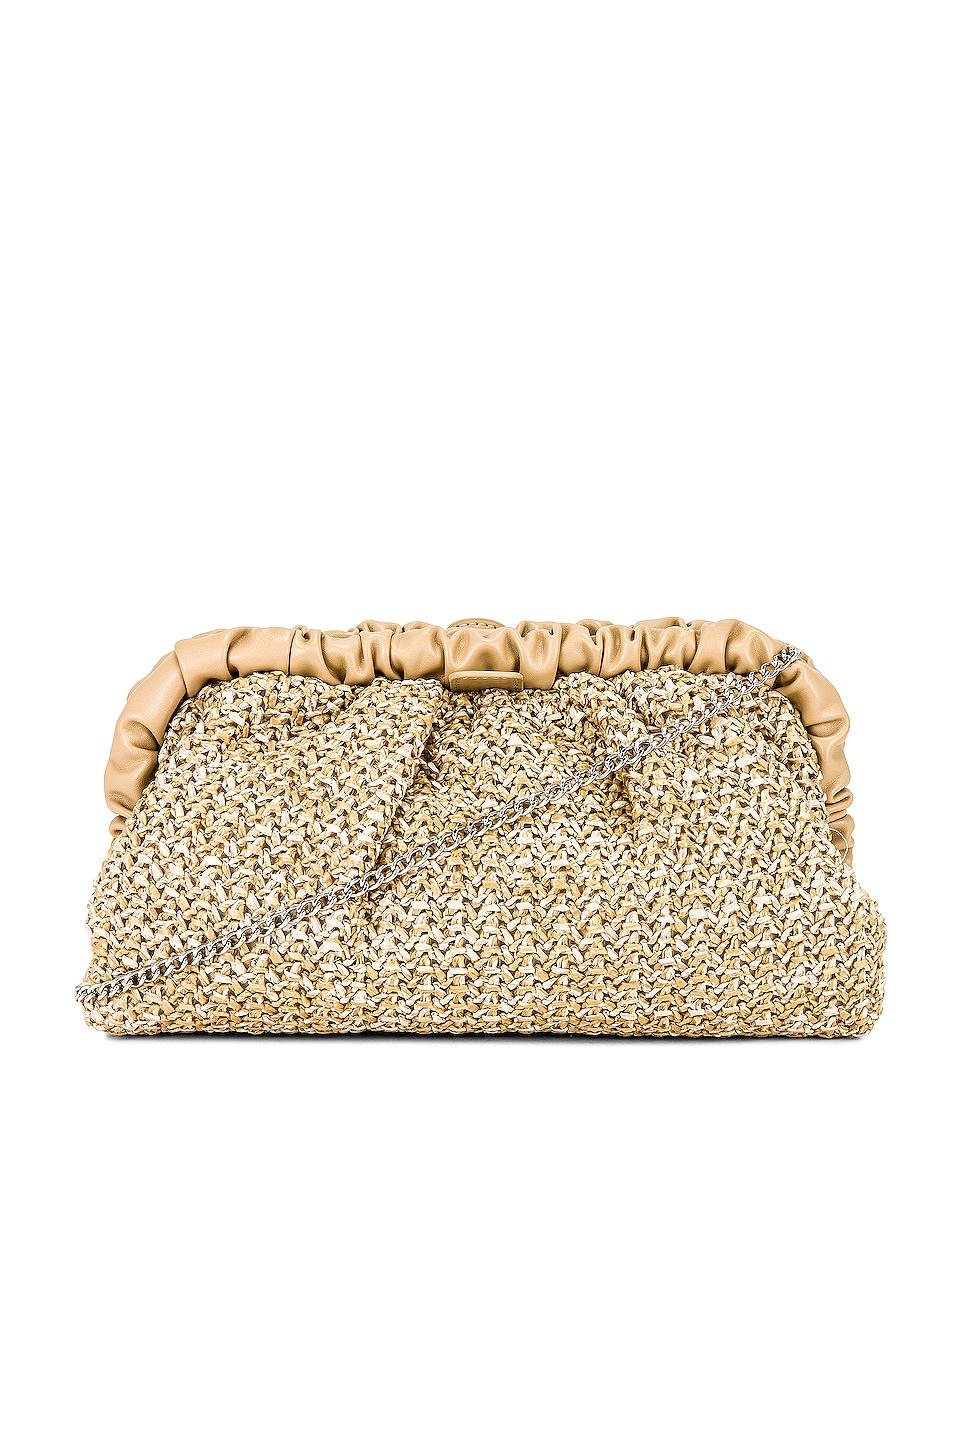 Amalia Pleated Woven Clutch in Natural 